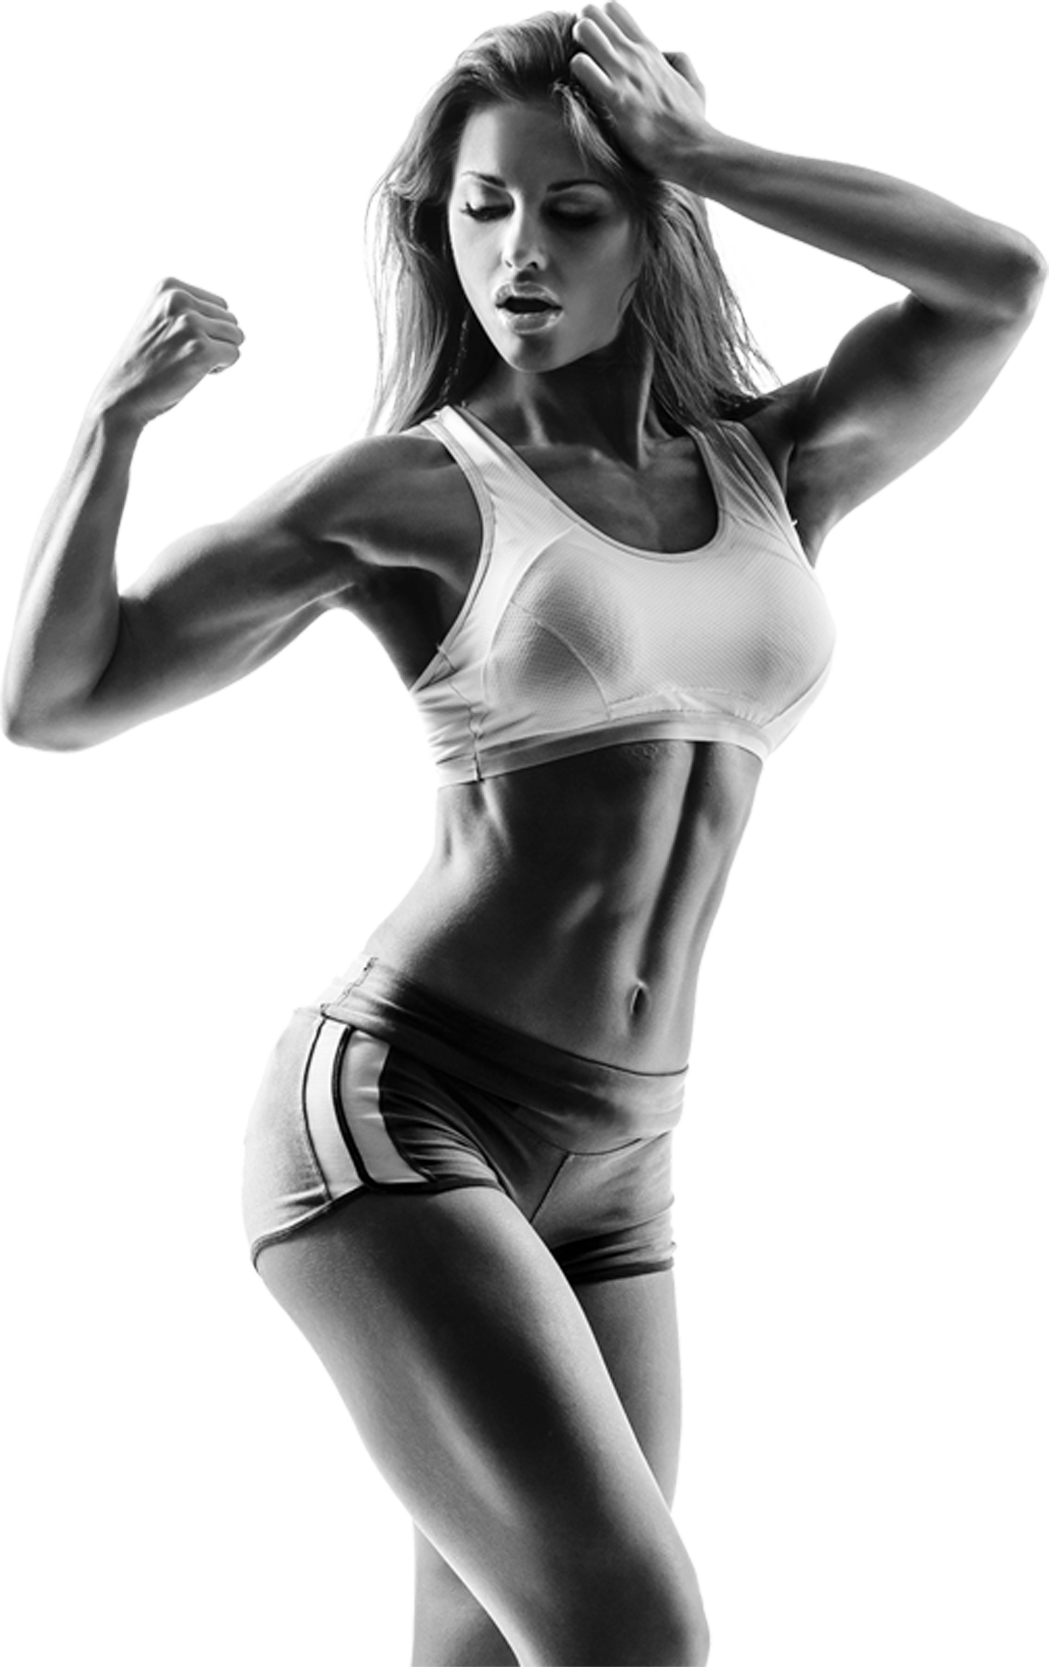 A Woman Flexing Her Muscles